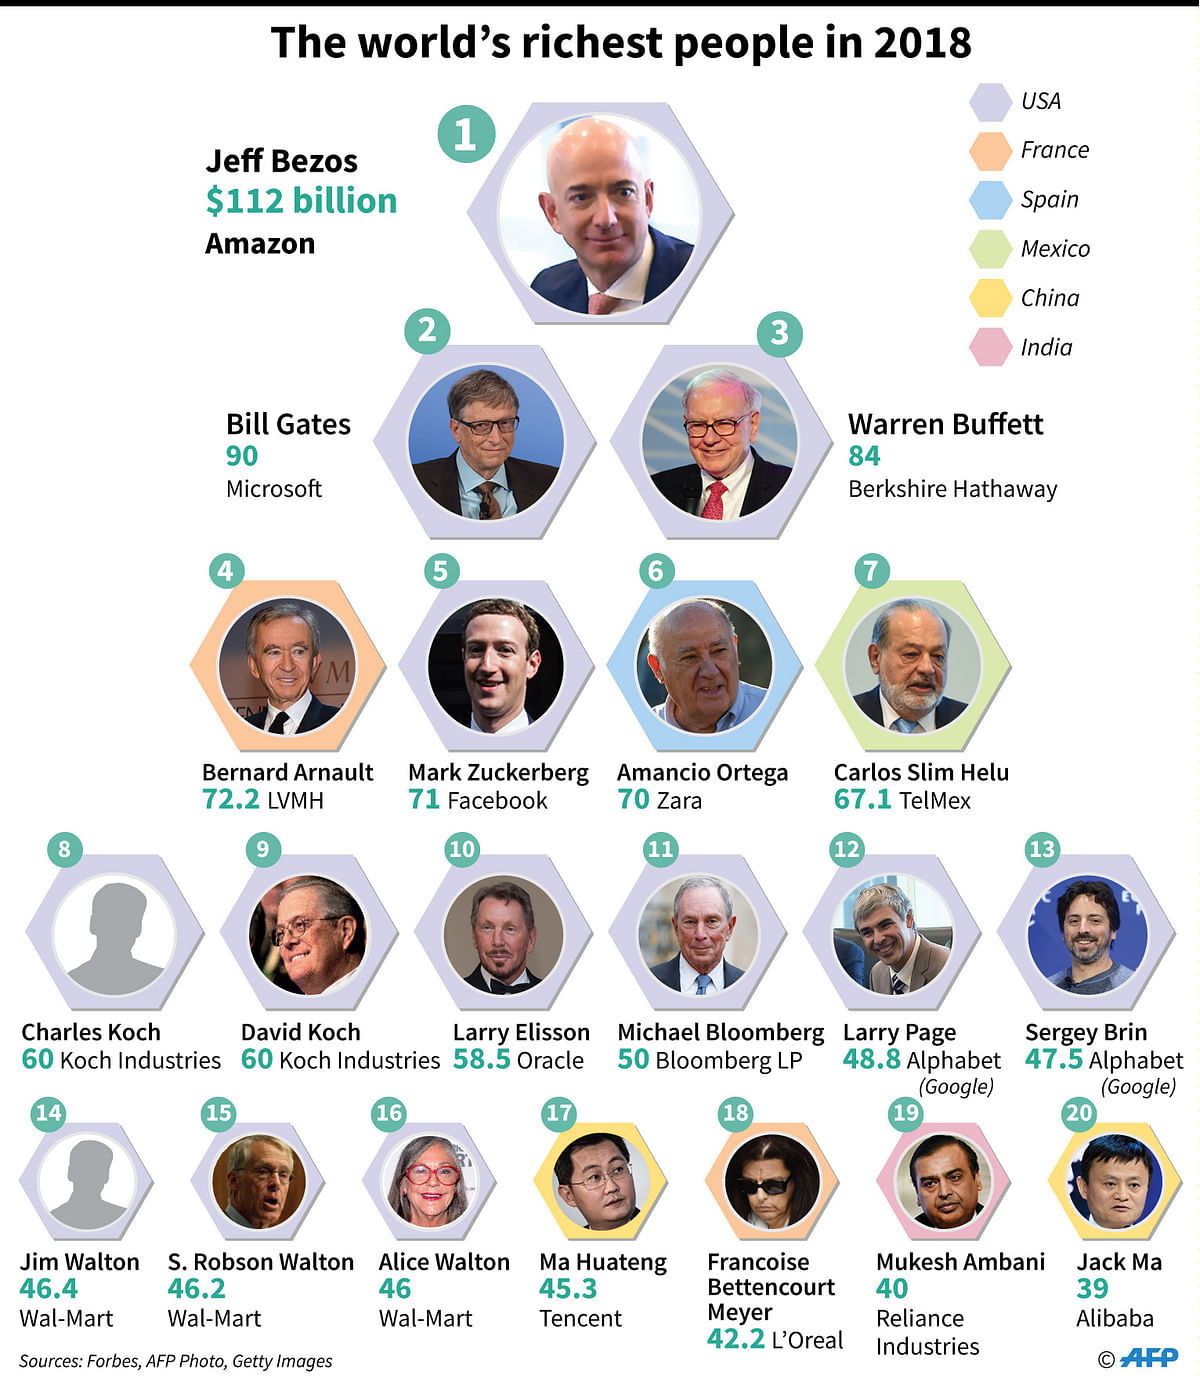 Top 20 billionaires, the richest people in the world. Photo: AFP